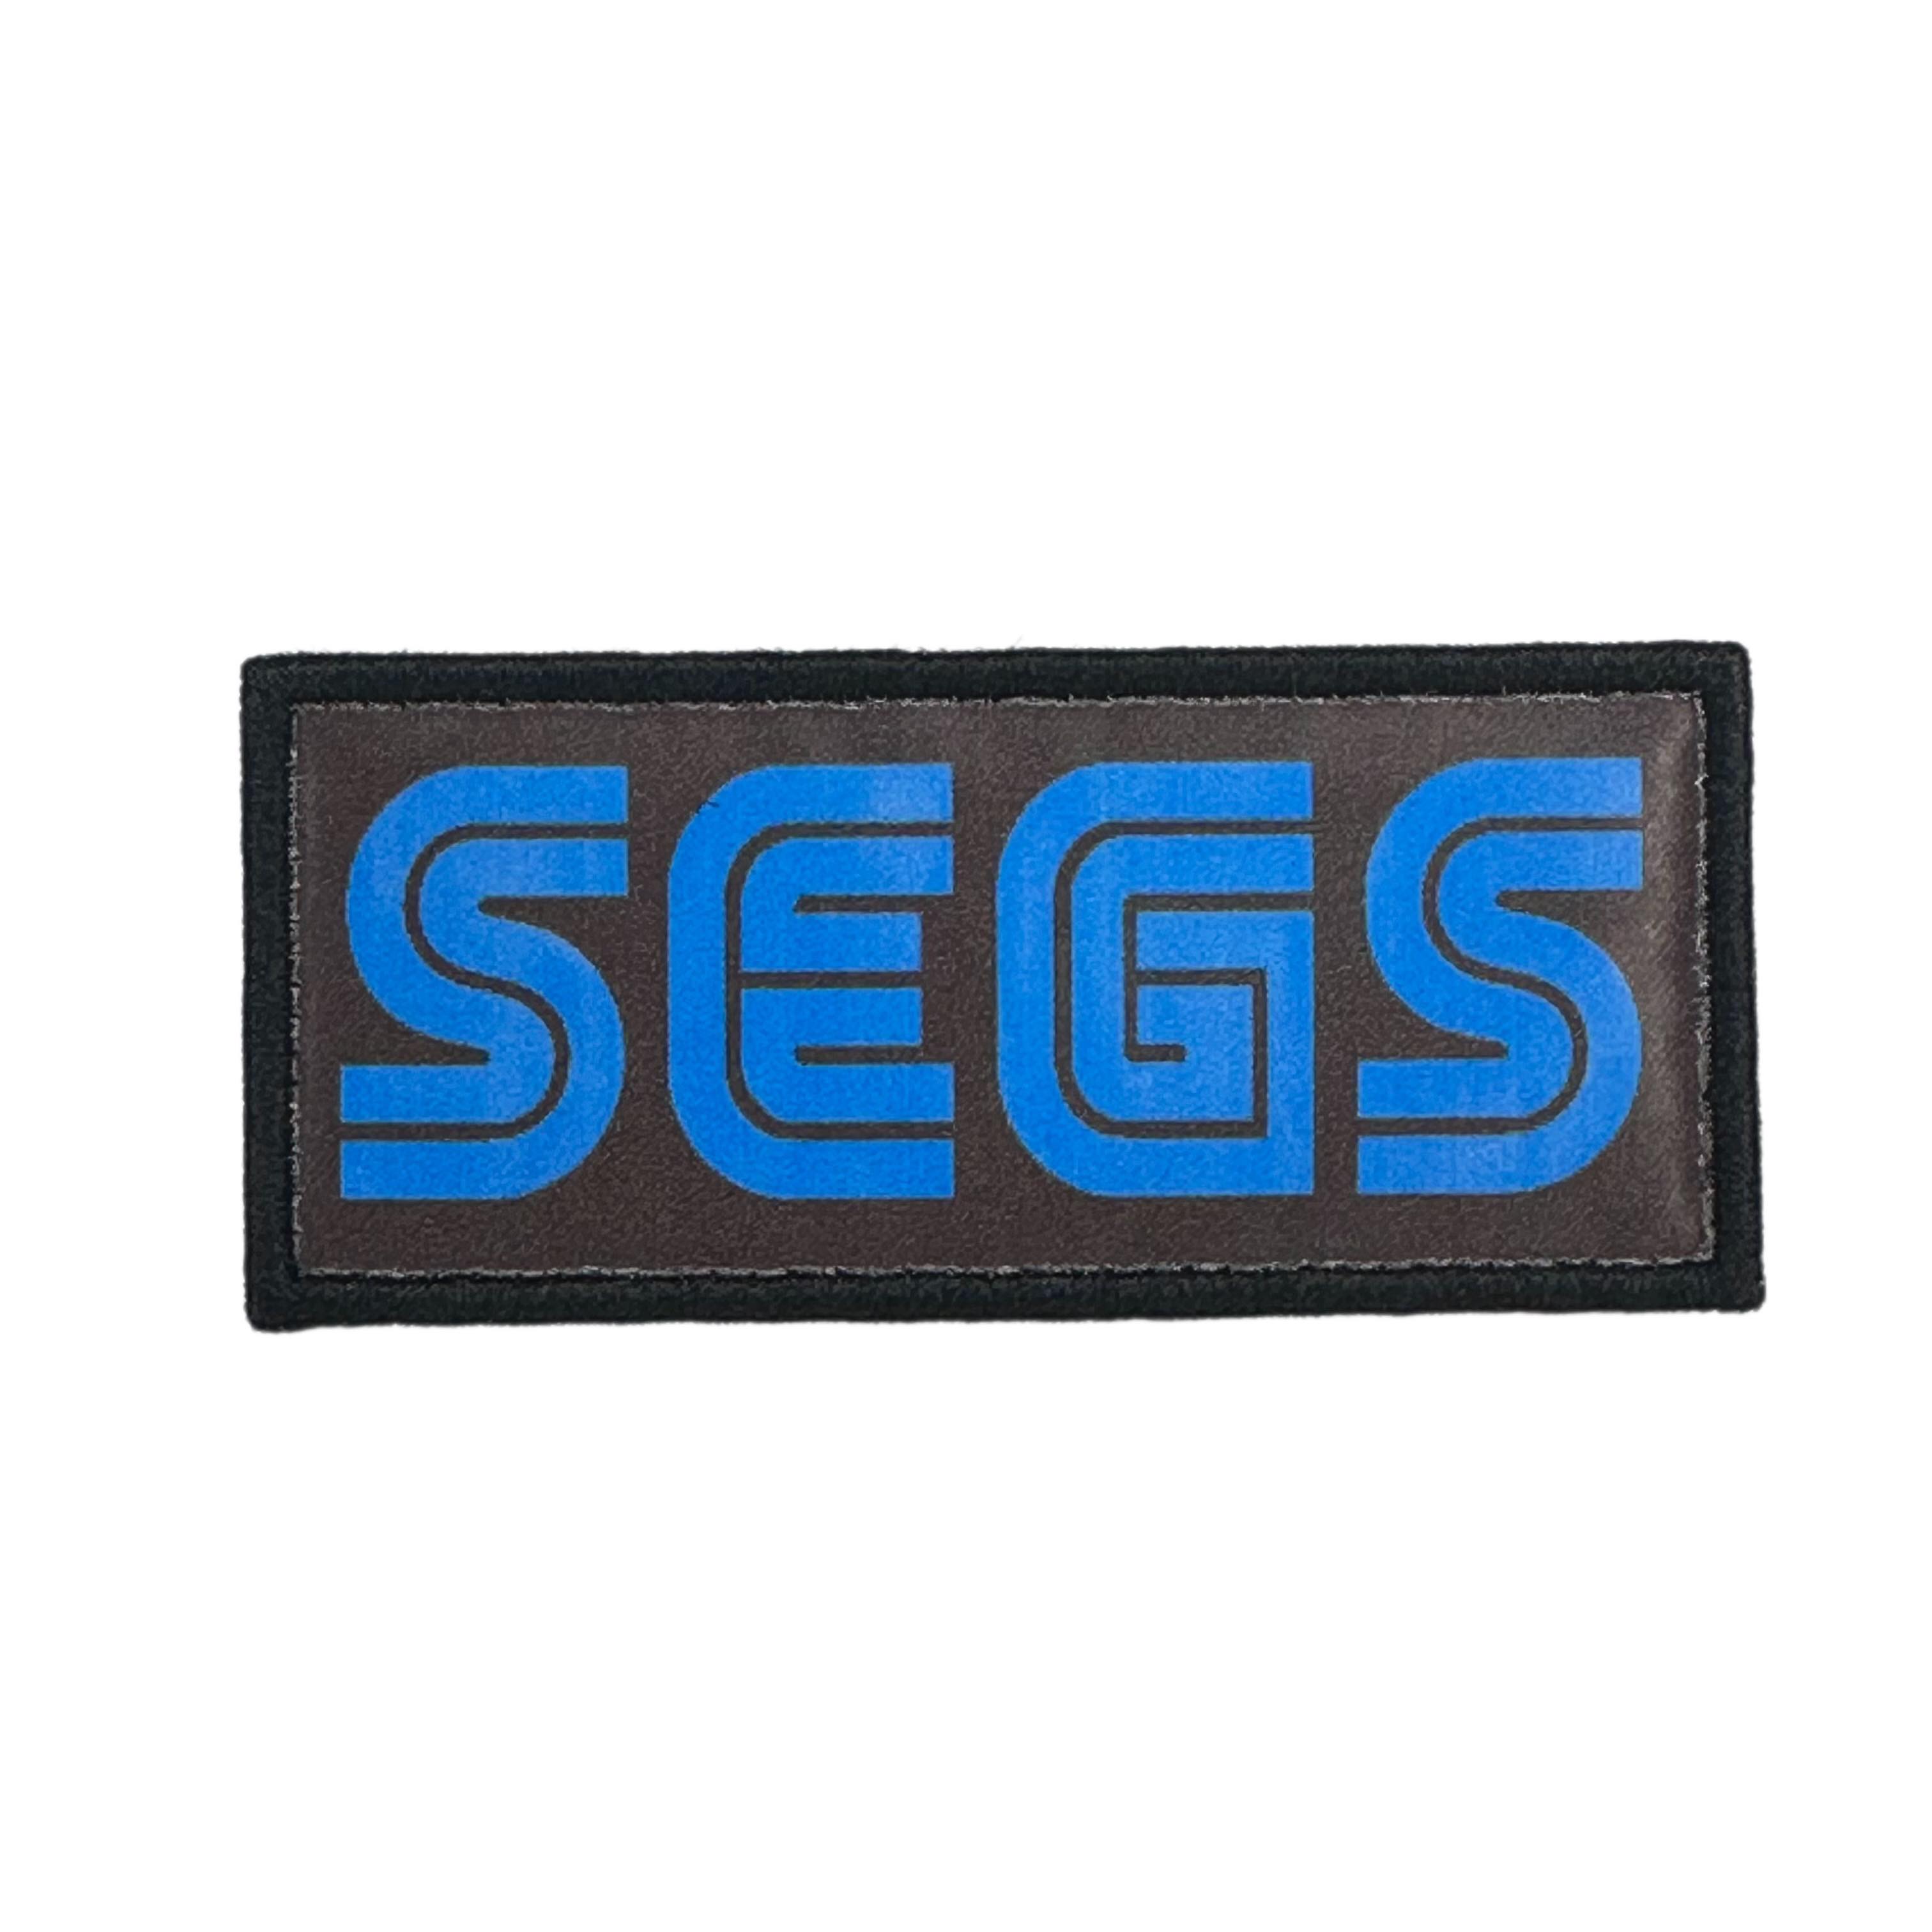 Printed Morale Patches - SEGS logo